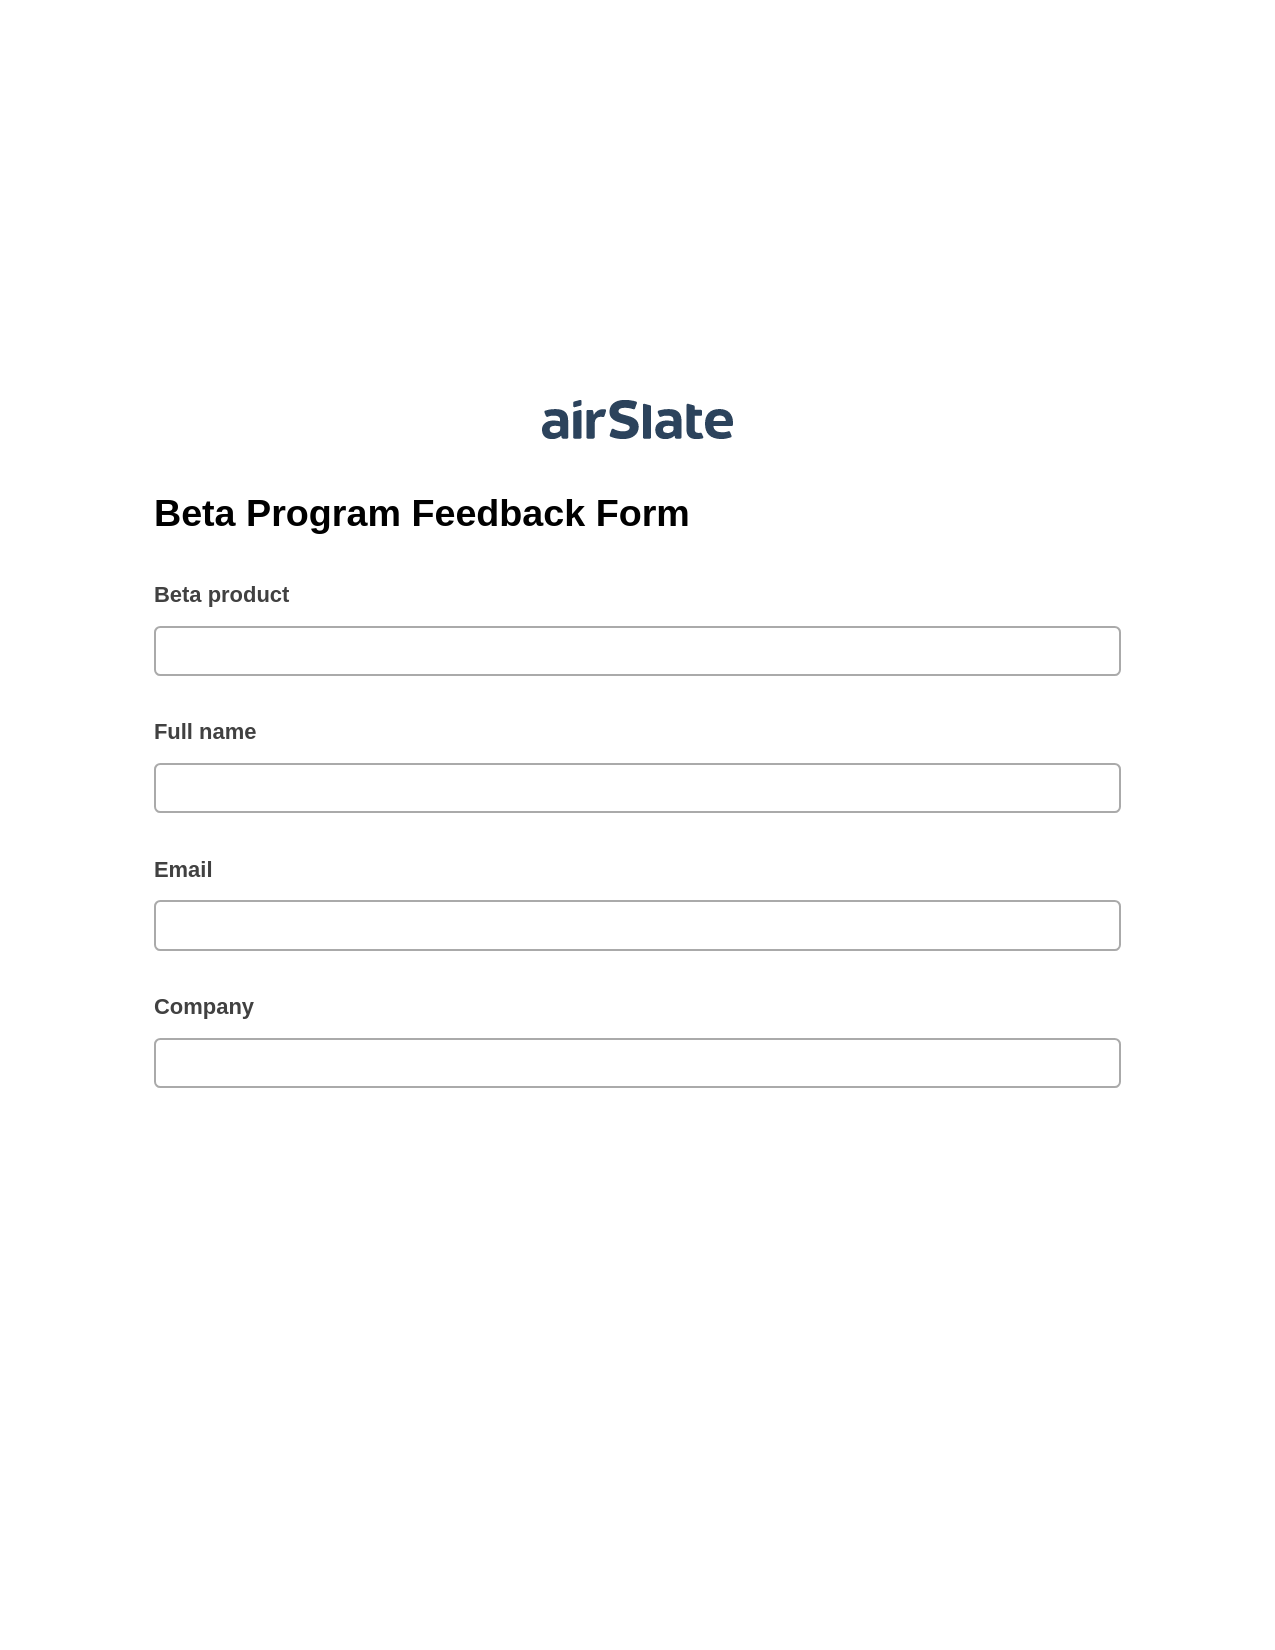 Beta Program Feedback Form Pre-fill from Excel Spreadsheet Bot, Send a Slate with Roles Bot, Export to Salesforce Bot